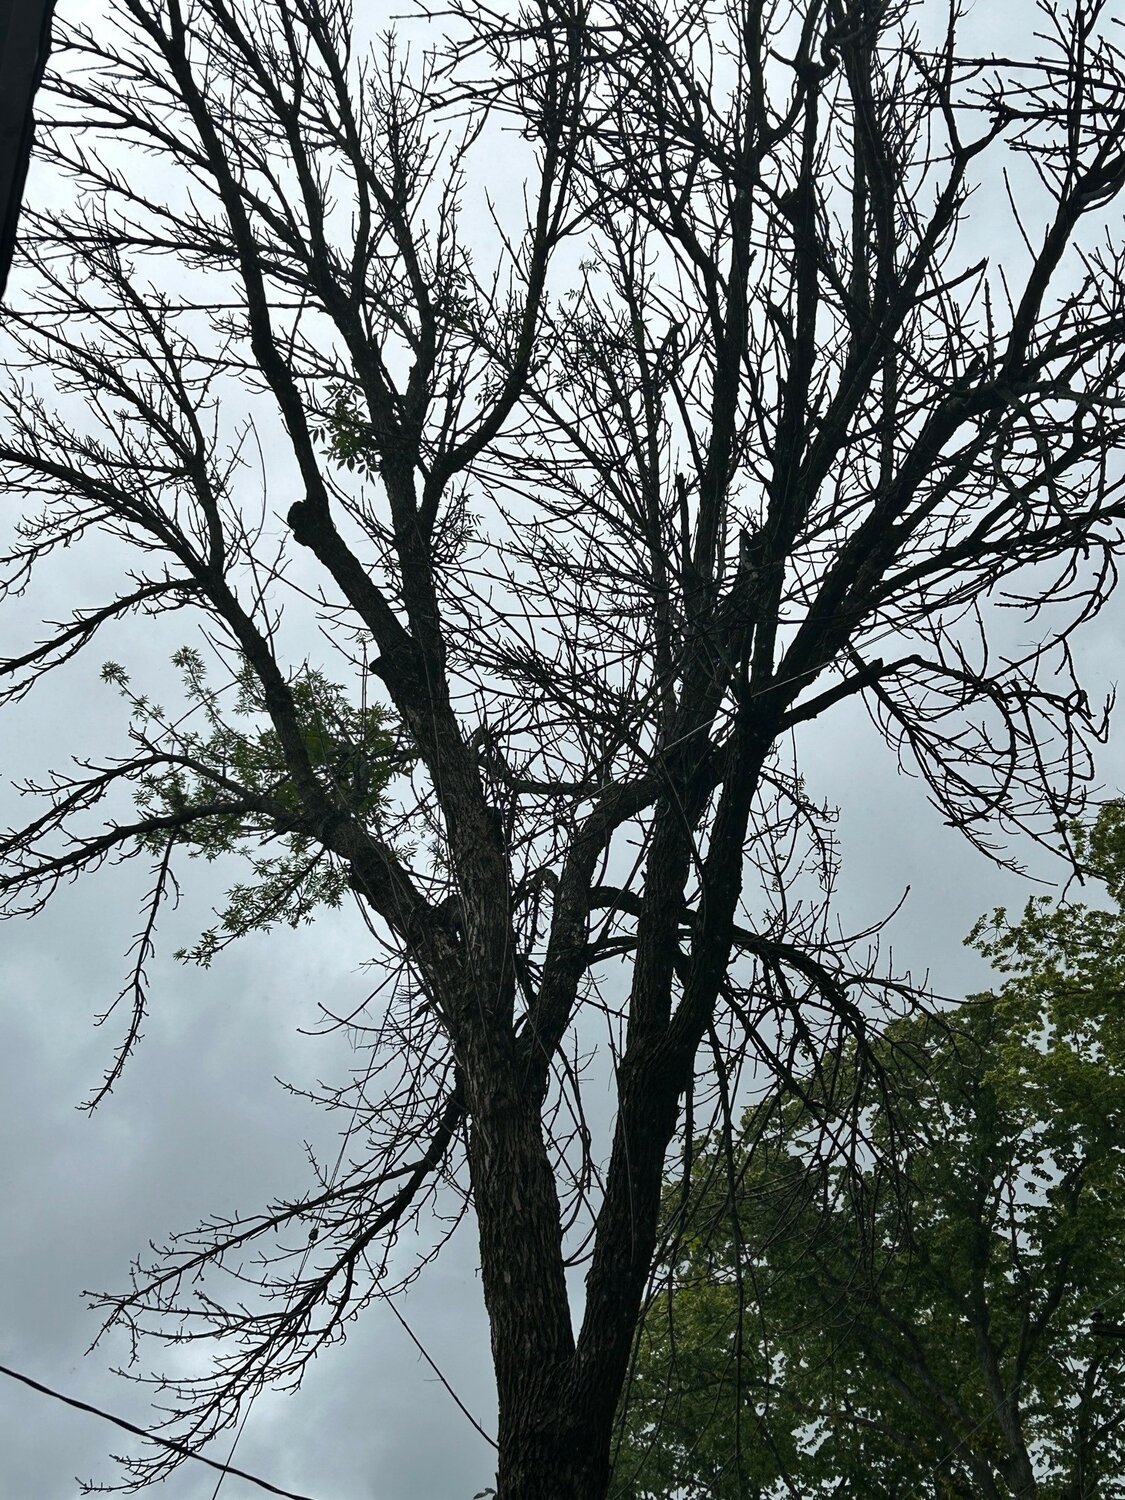 The Emerald Ash Borer has been weakening Ash trees in Bristol. There have been 66 trees in town identified from a slight to severe threat to public health due to their deteriorating condition.